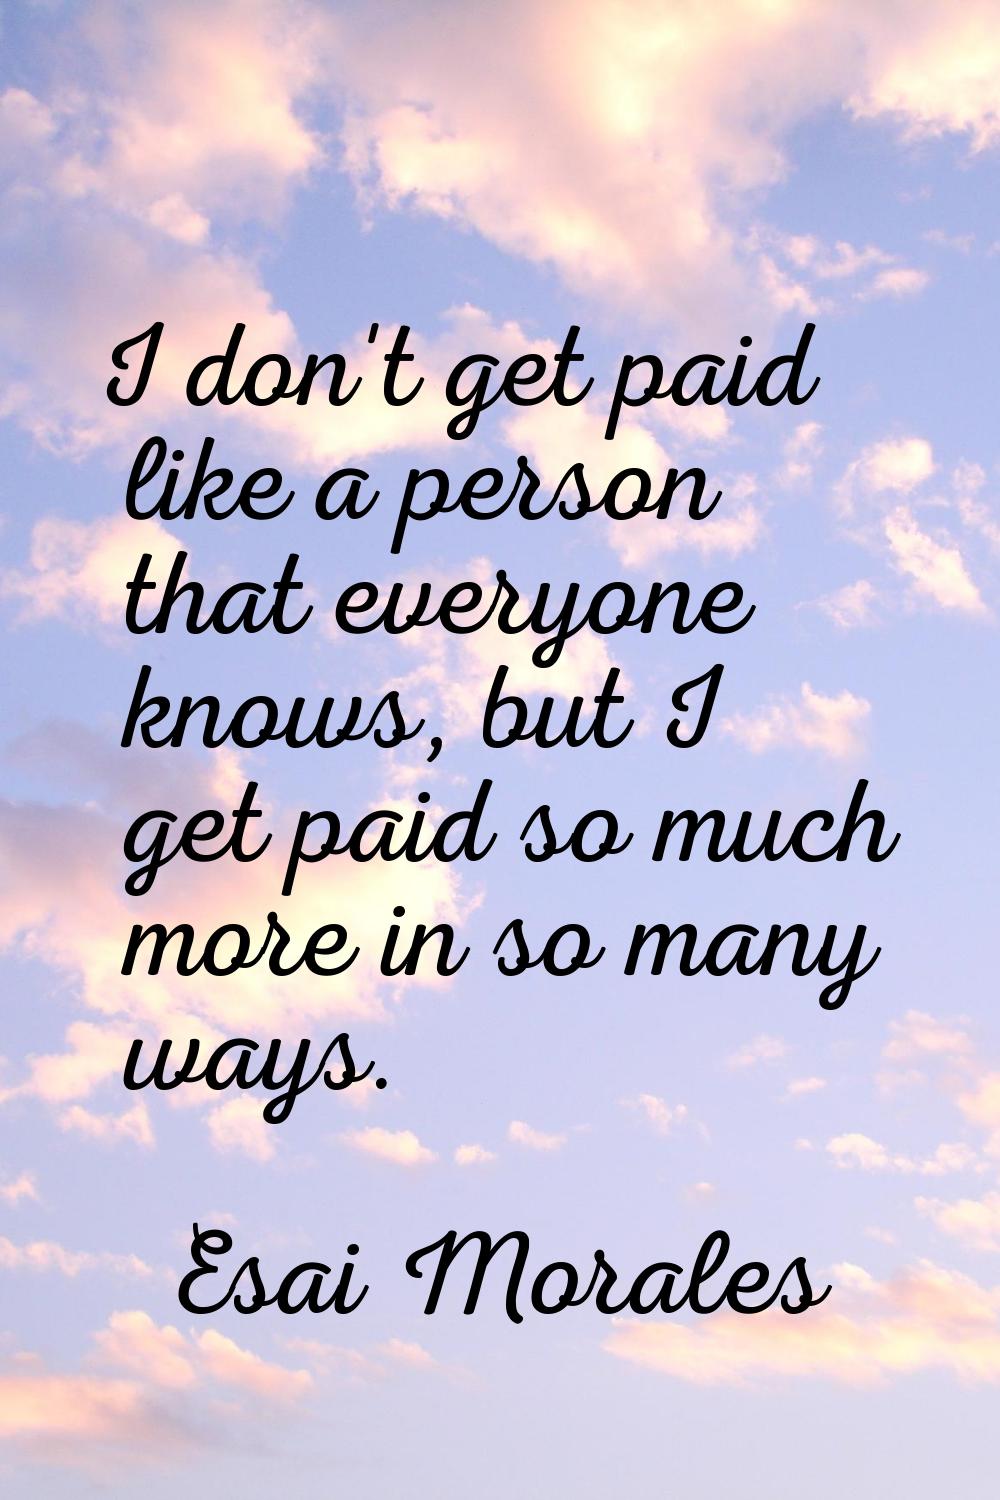 I don't get paid like a person that everyone knows, but I get paid so much more in so many ways.